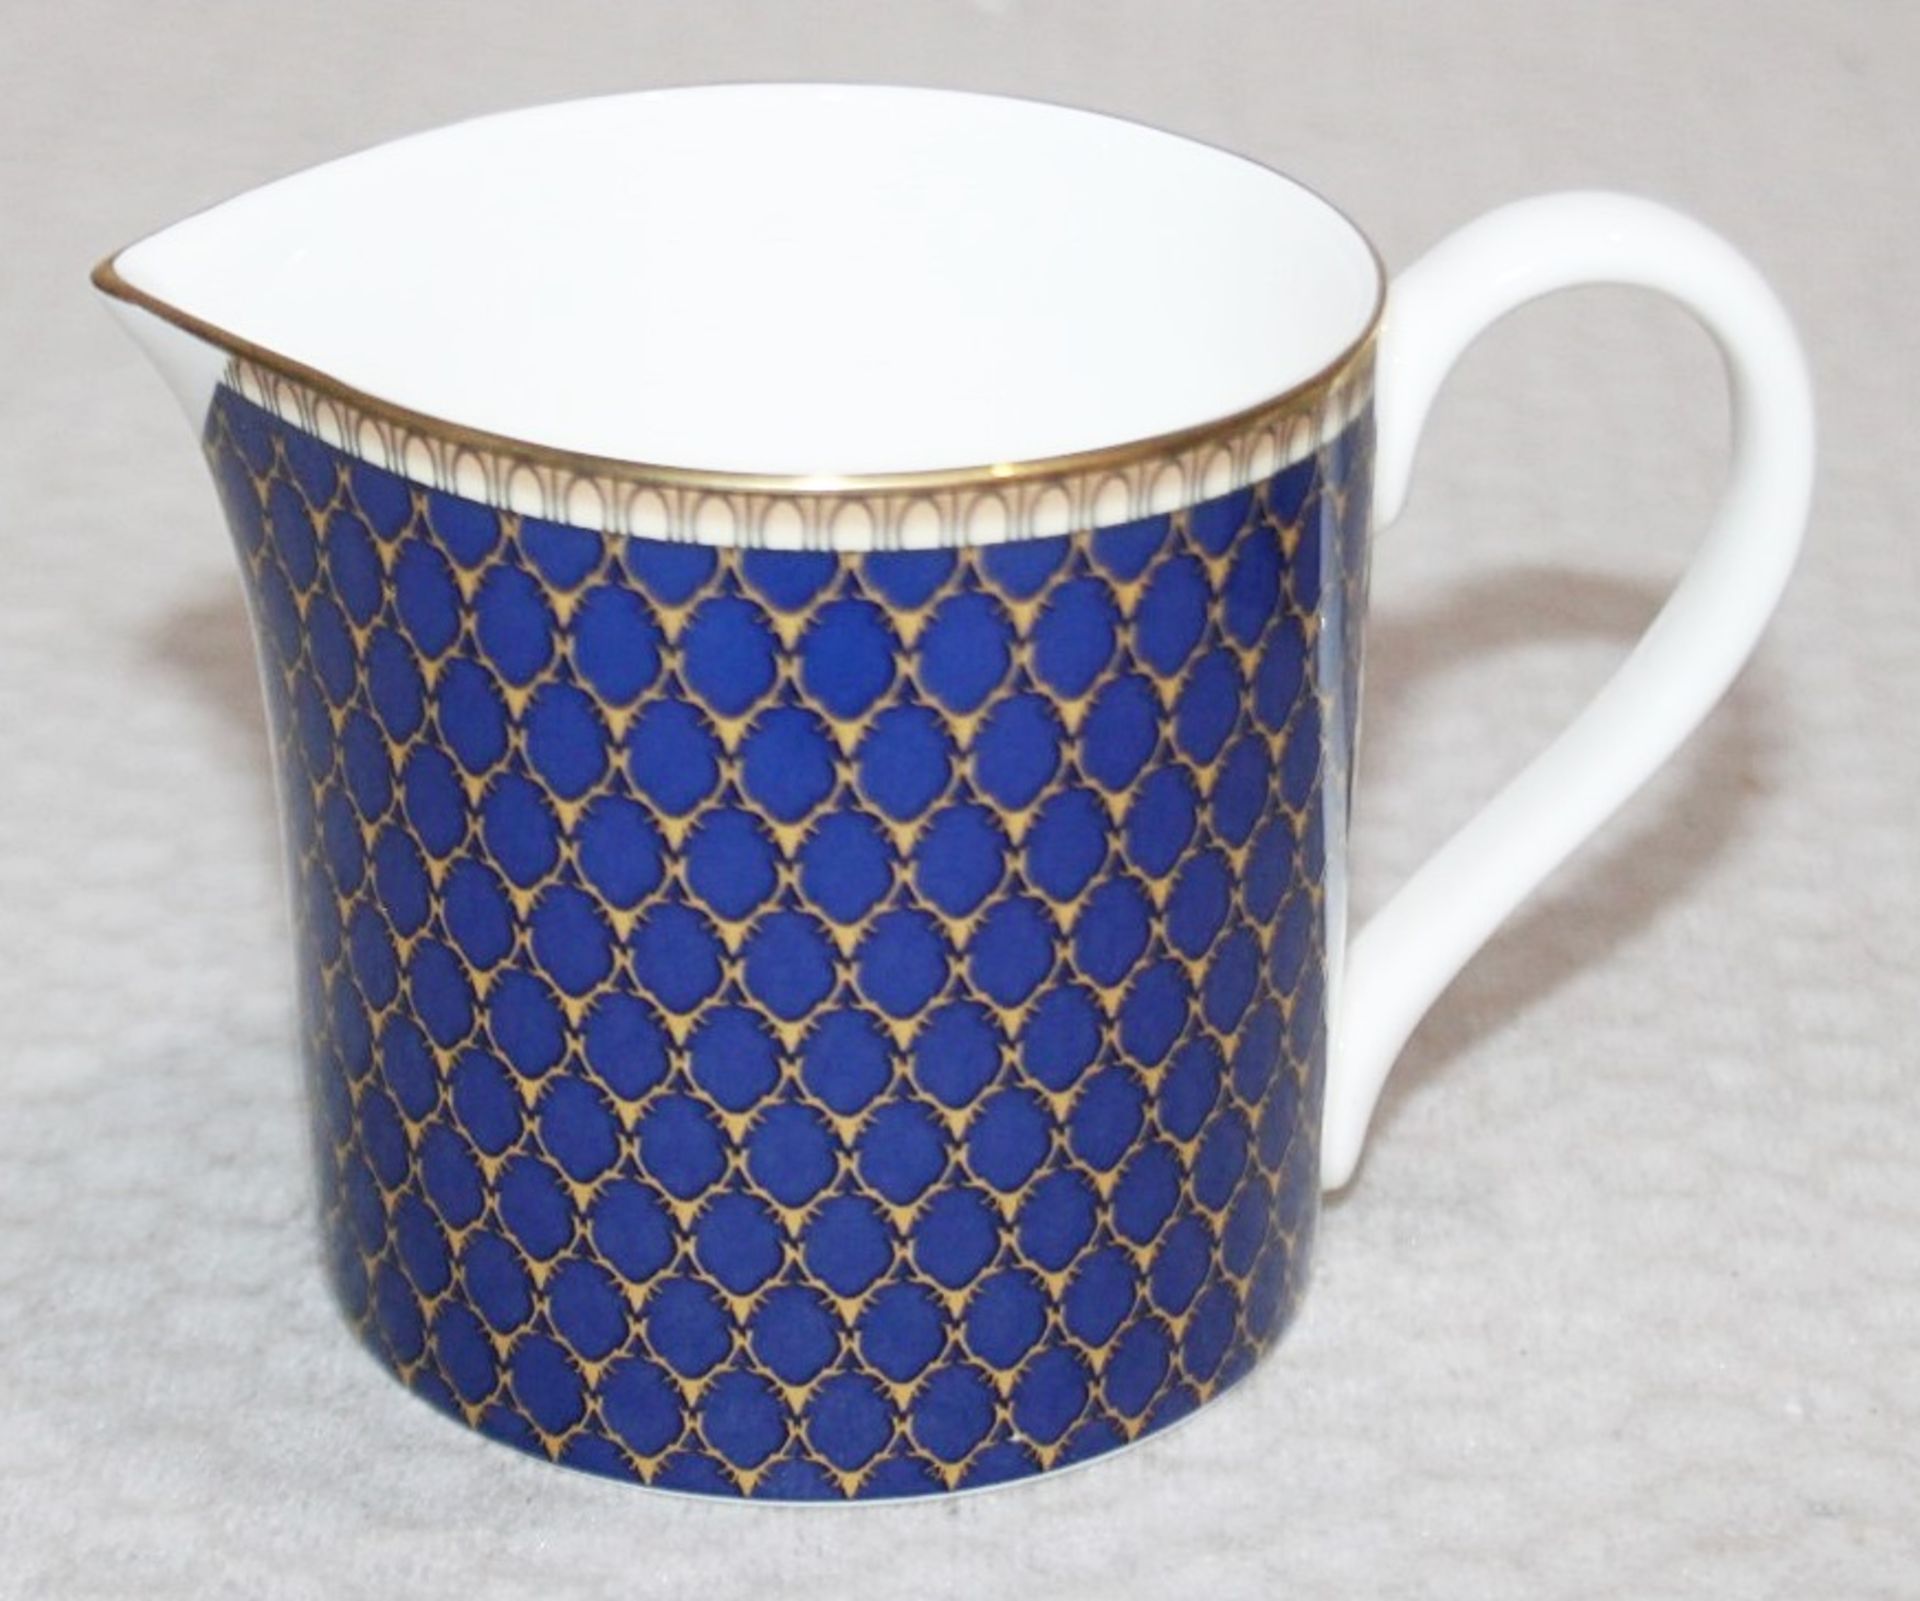 1 x HALCYON DAYS 'Antler Trellis' Tea For Two Set - Original Price £415.00 *Read Condition Report* - Image 5 of 21